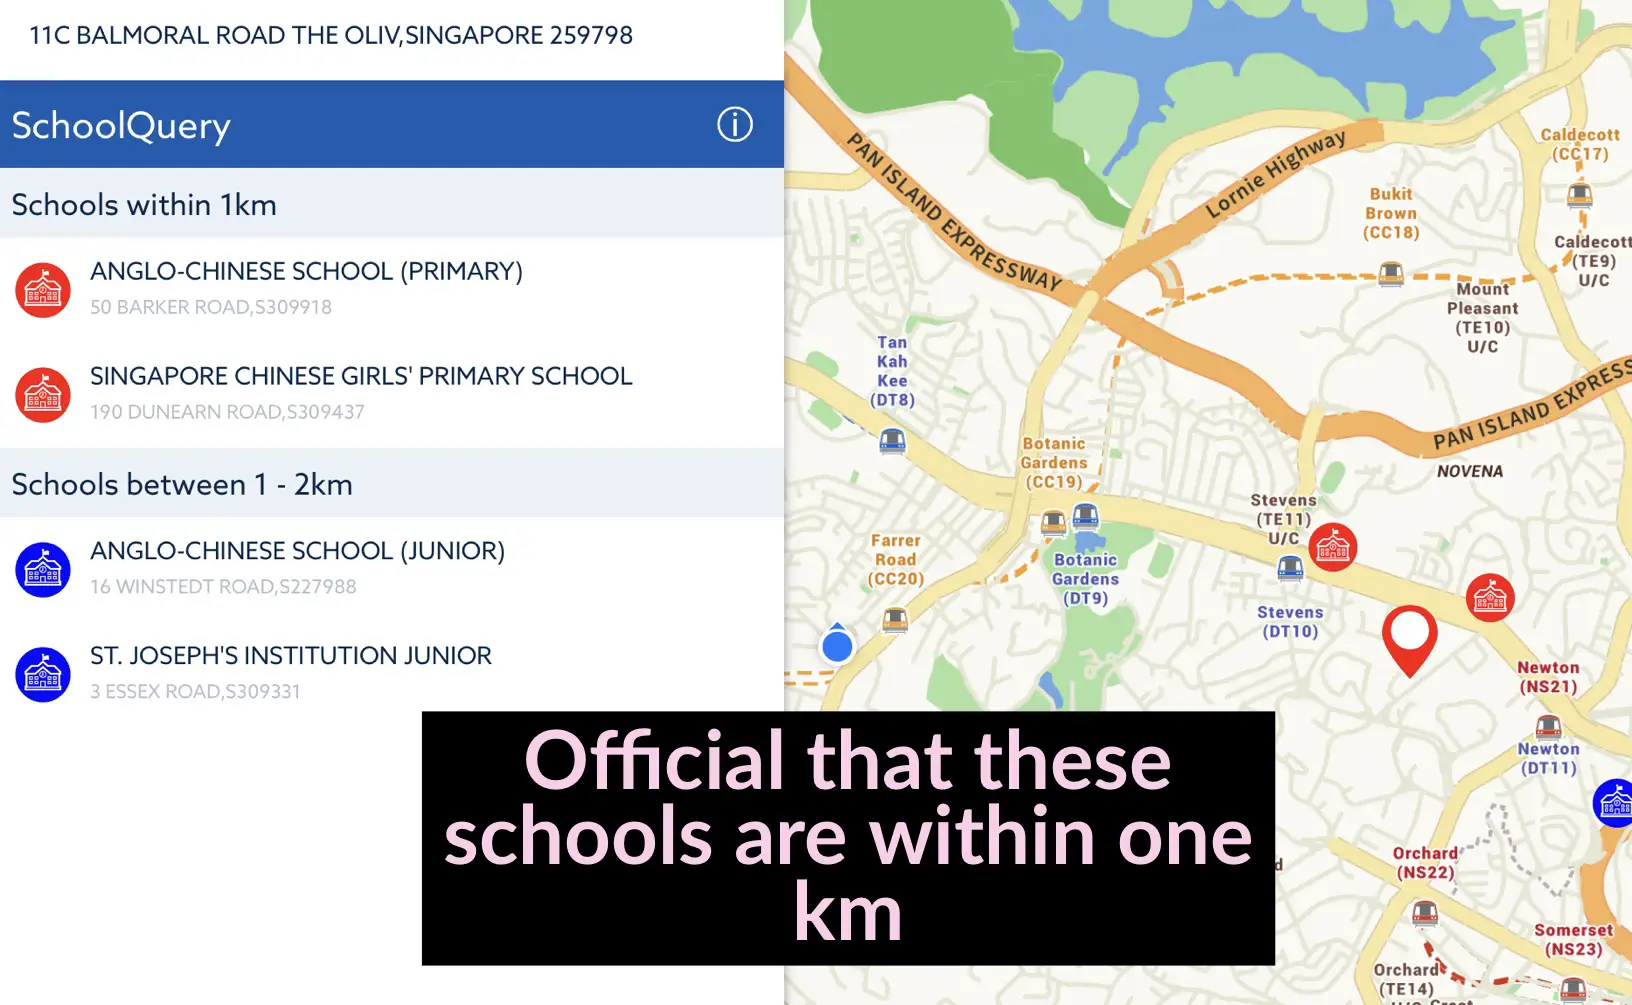 What are the schools within 1 km of the Hyde